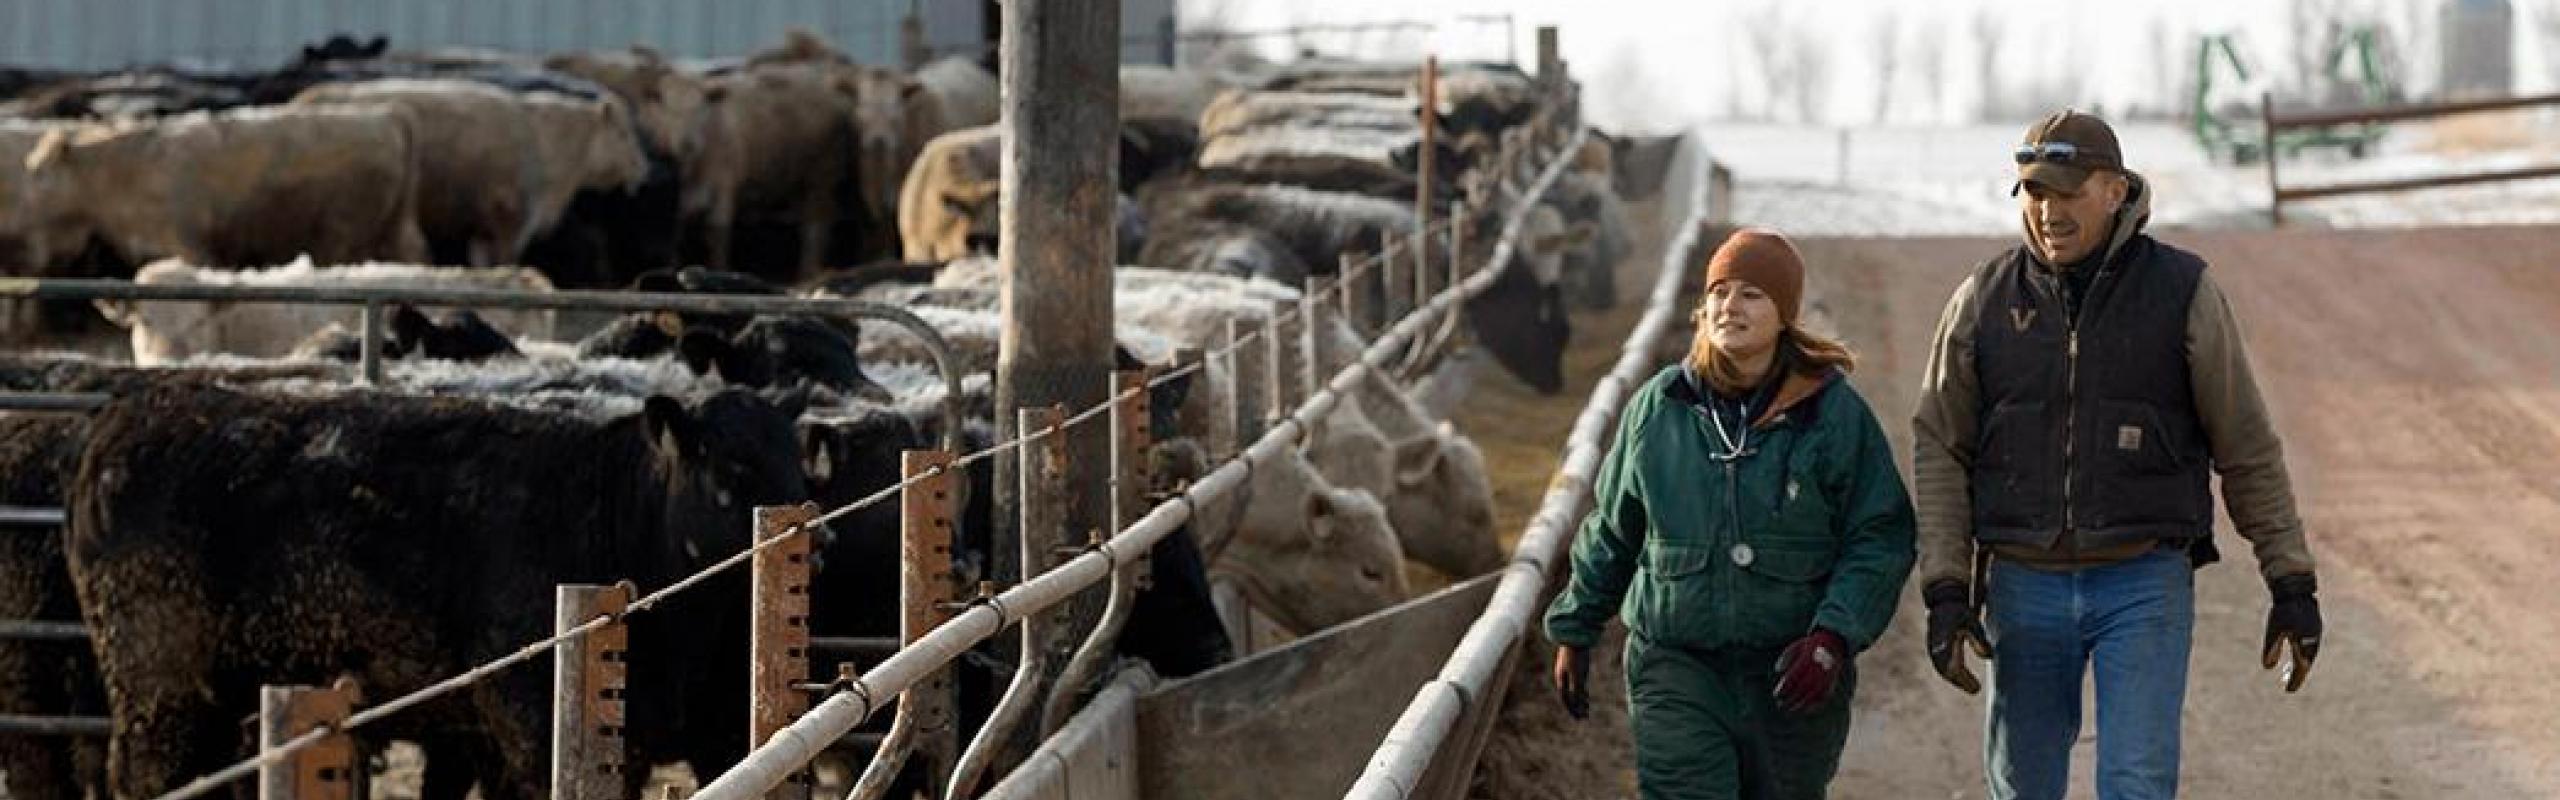 Two cattle practitioners walk along a pen of cattle